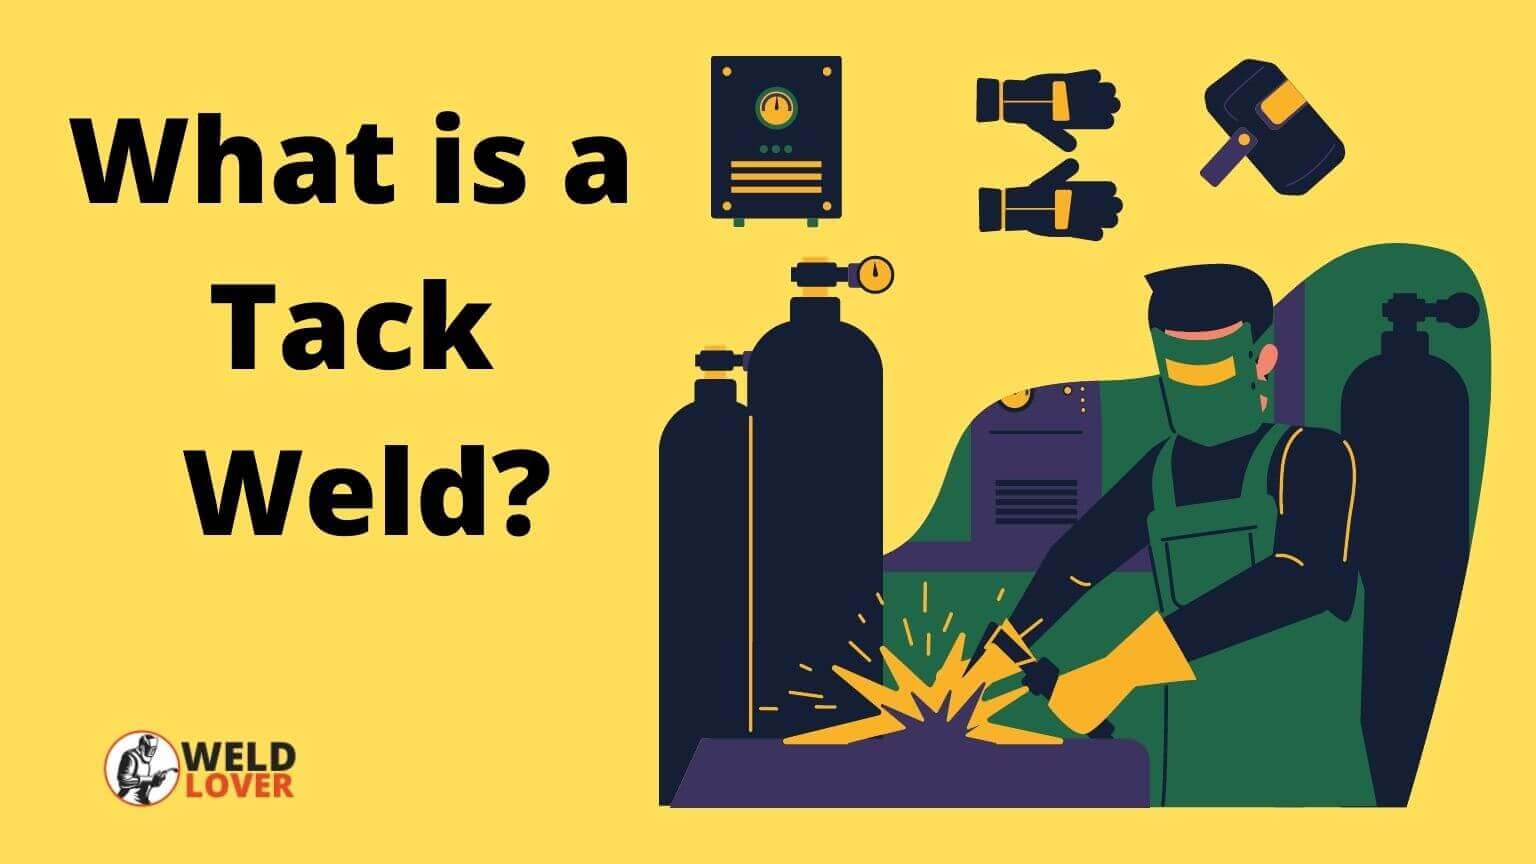 What is a Tack Weld